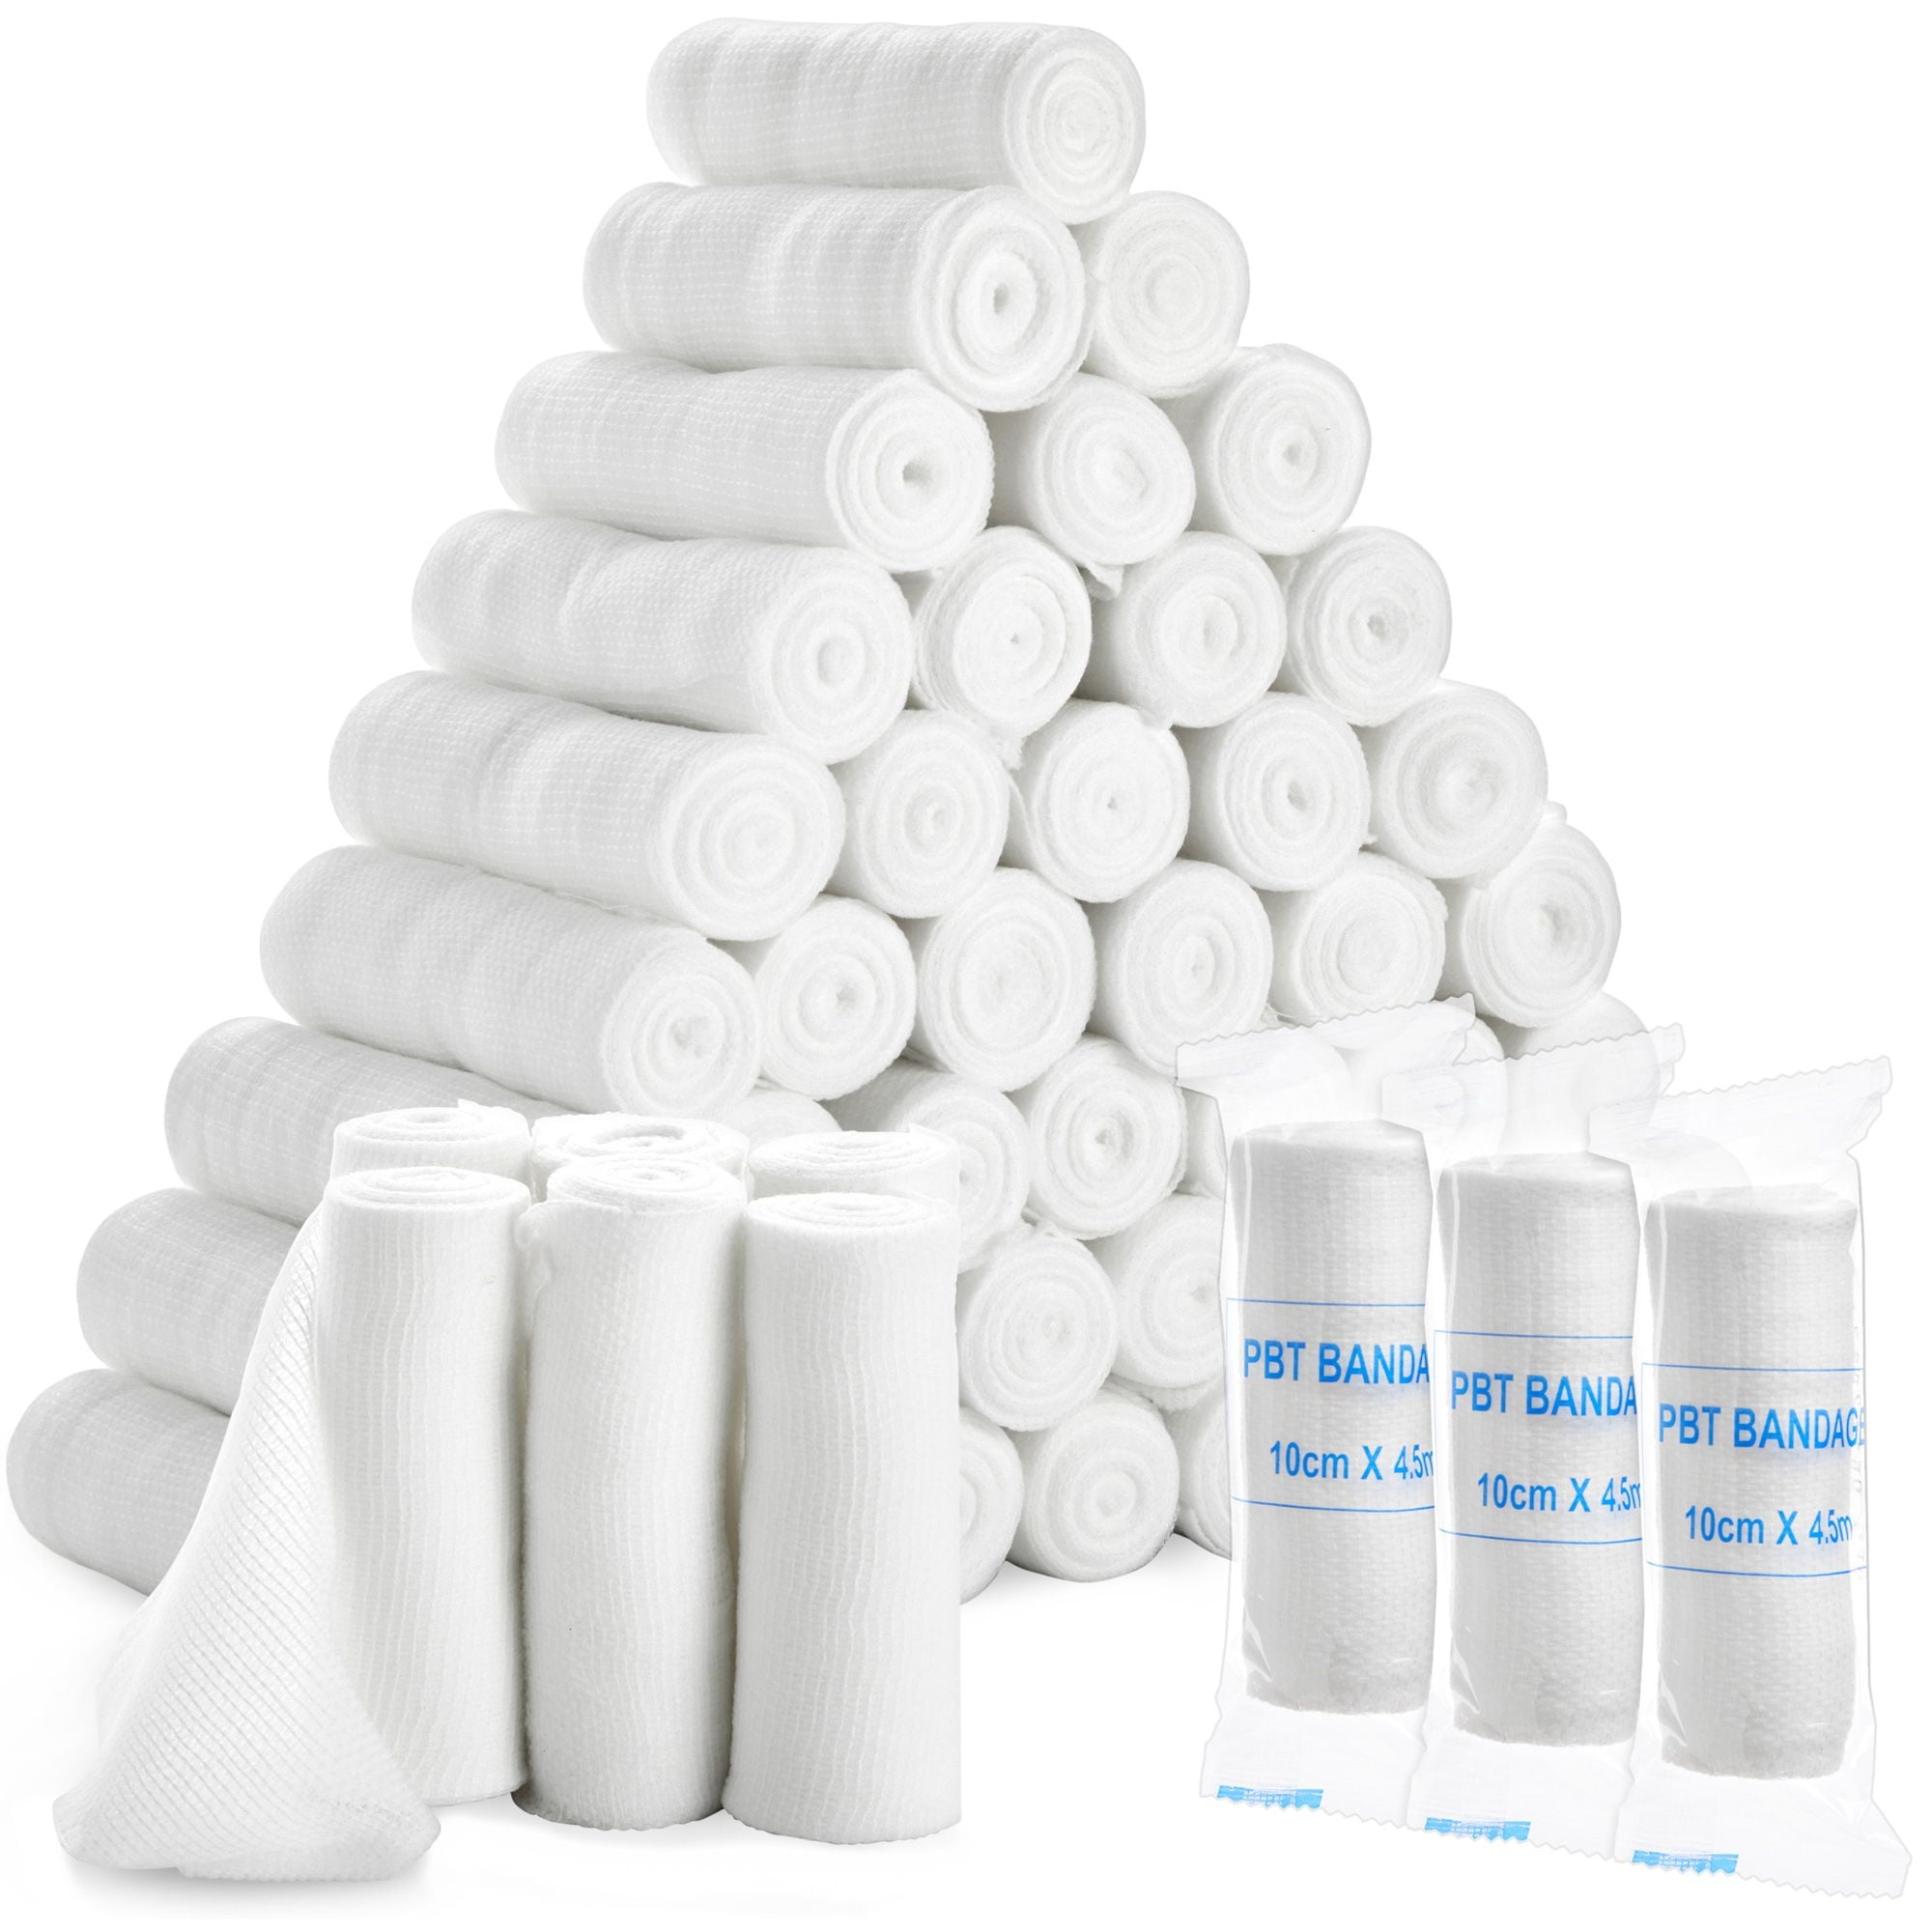 Navaris Plaster Cloth Rolls (M, Pack of 8) - Gauze Bandages for Body Casts,  Craft Projects, Belly Molds - Easy to Use Wrap Strips - 4 W x 118 L